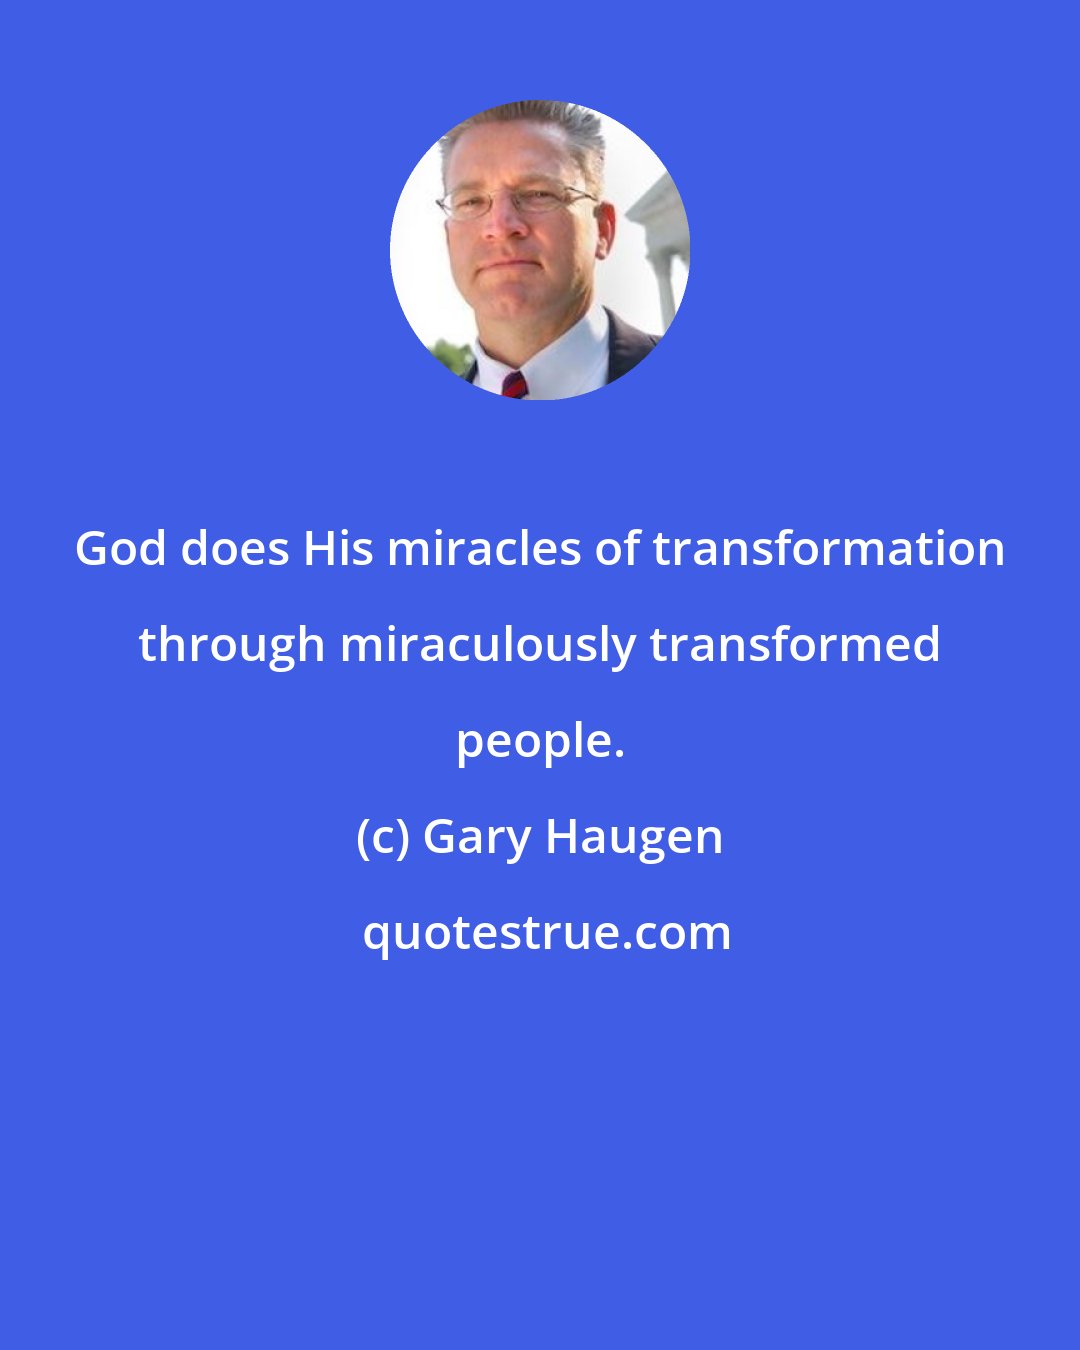 Gary Haugen: God does His miracles of transformation through miraculously transformed people.